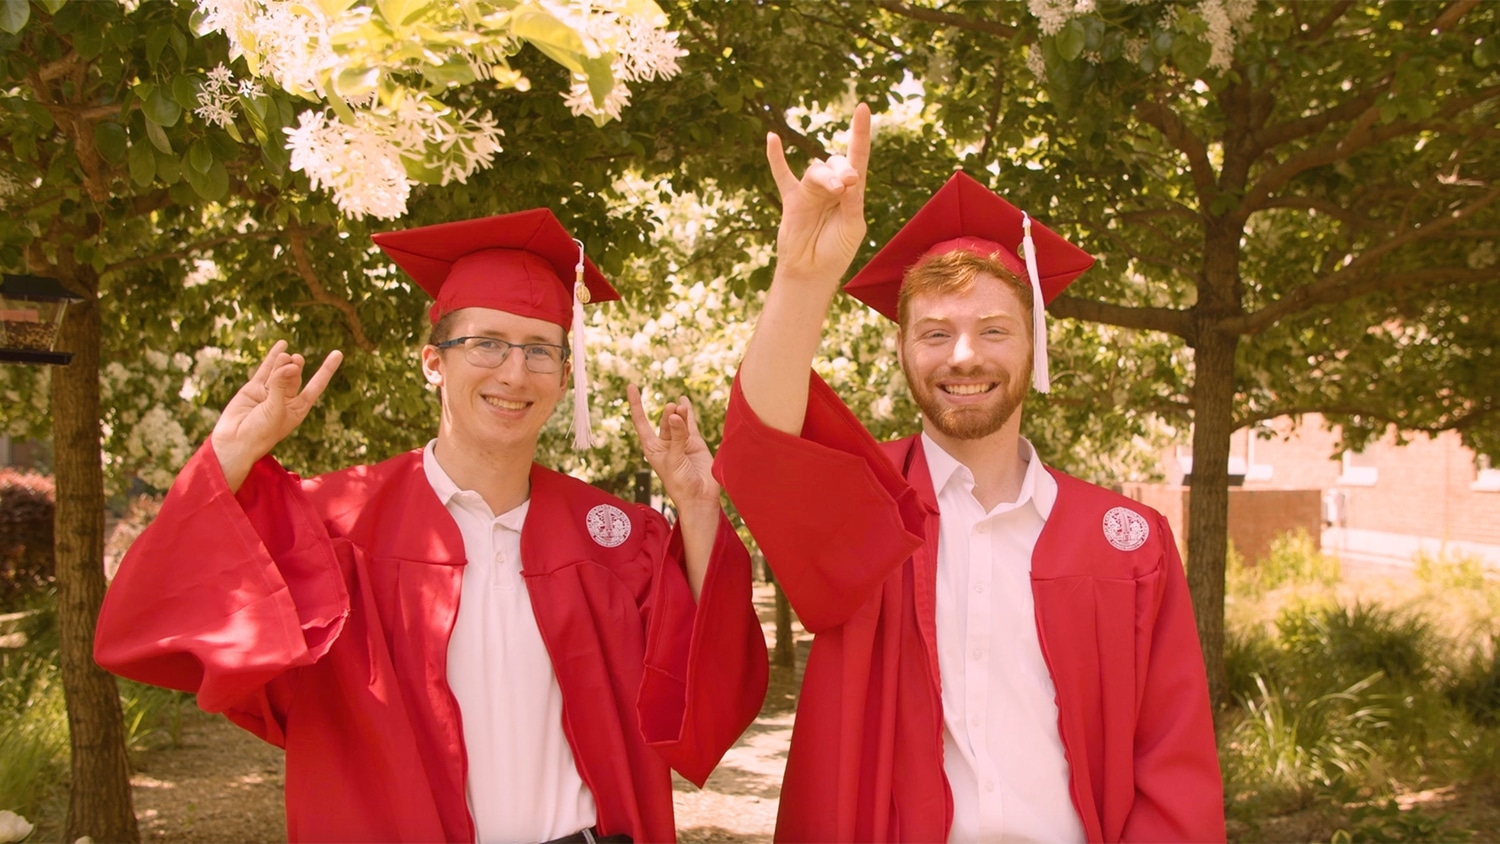 Parker Mitchell and Noah Weaver pose in their grad caps and gowns